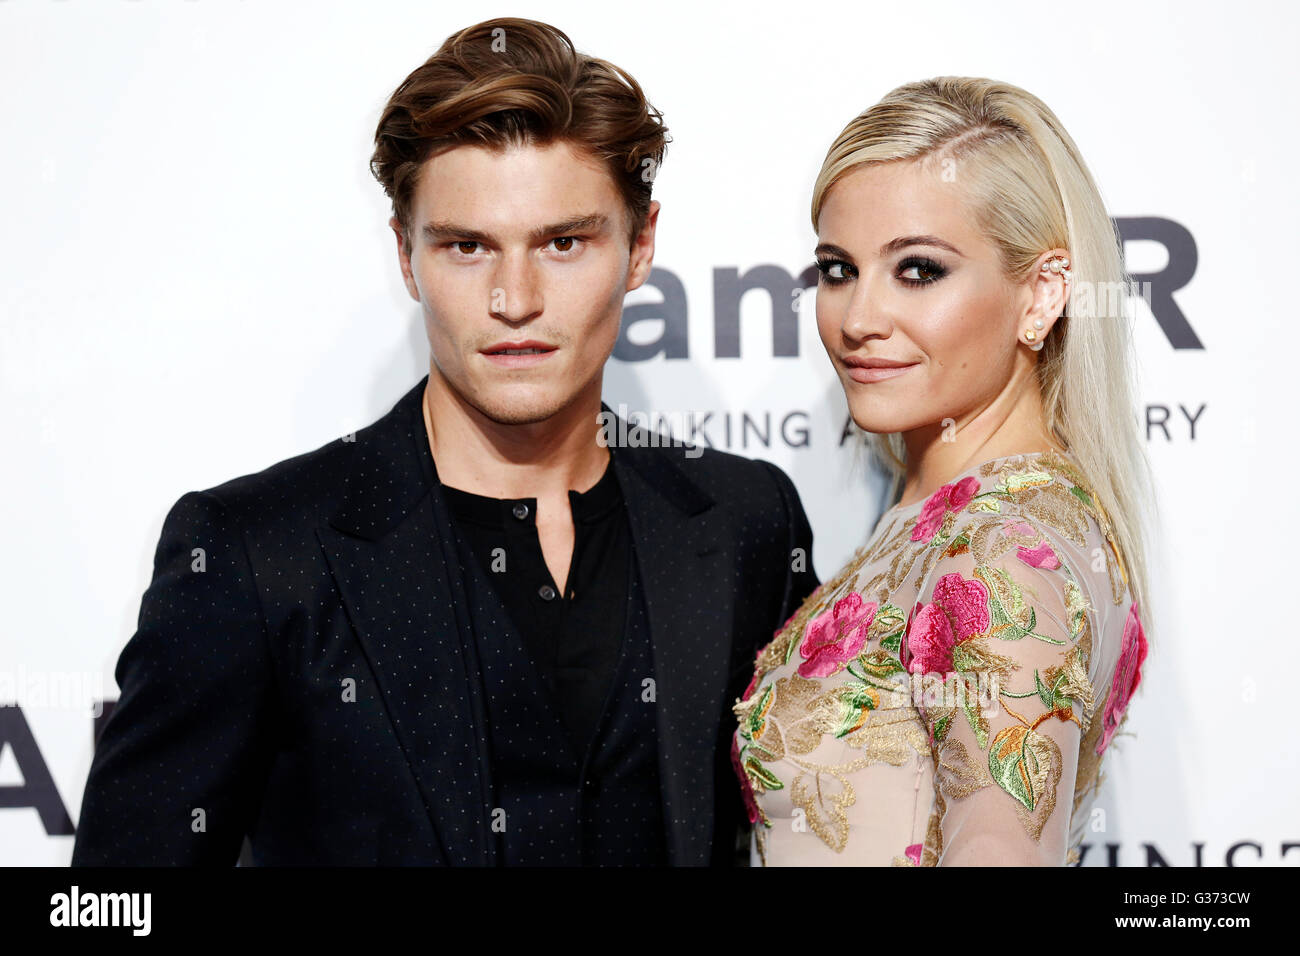 MILAN, ITALY, SEPTEMBER 26: Oliver Cheshire and Pixie Lott attend Amfar's gala night at Permanente on September 26, 2015 in Mila Stock Photo